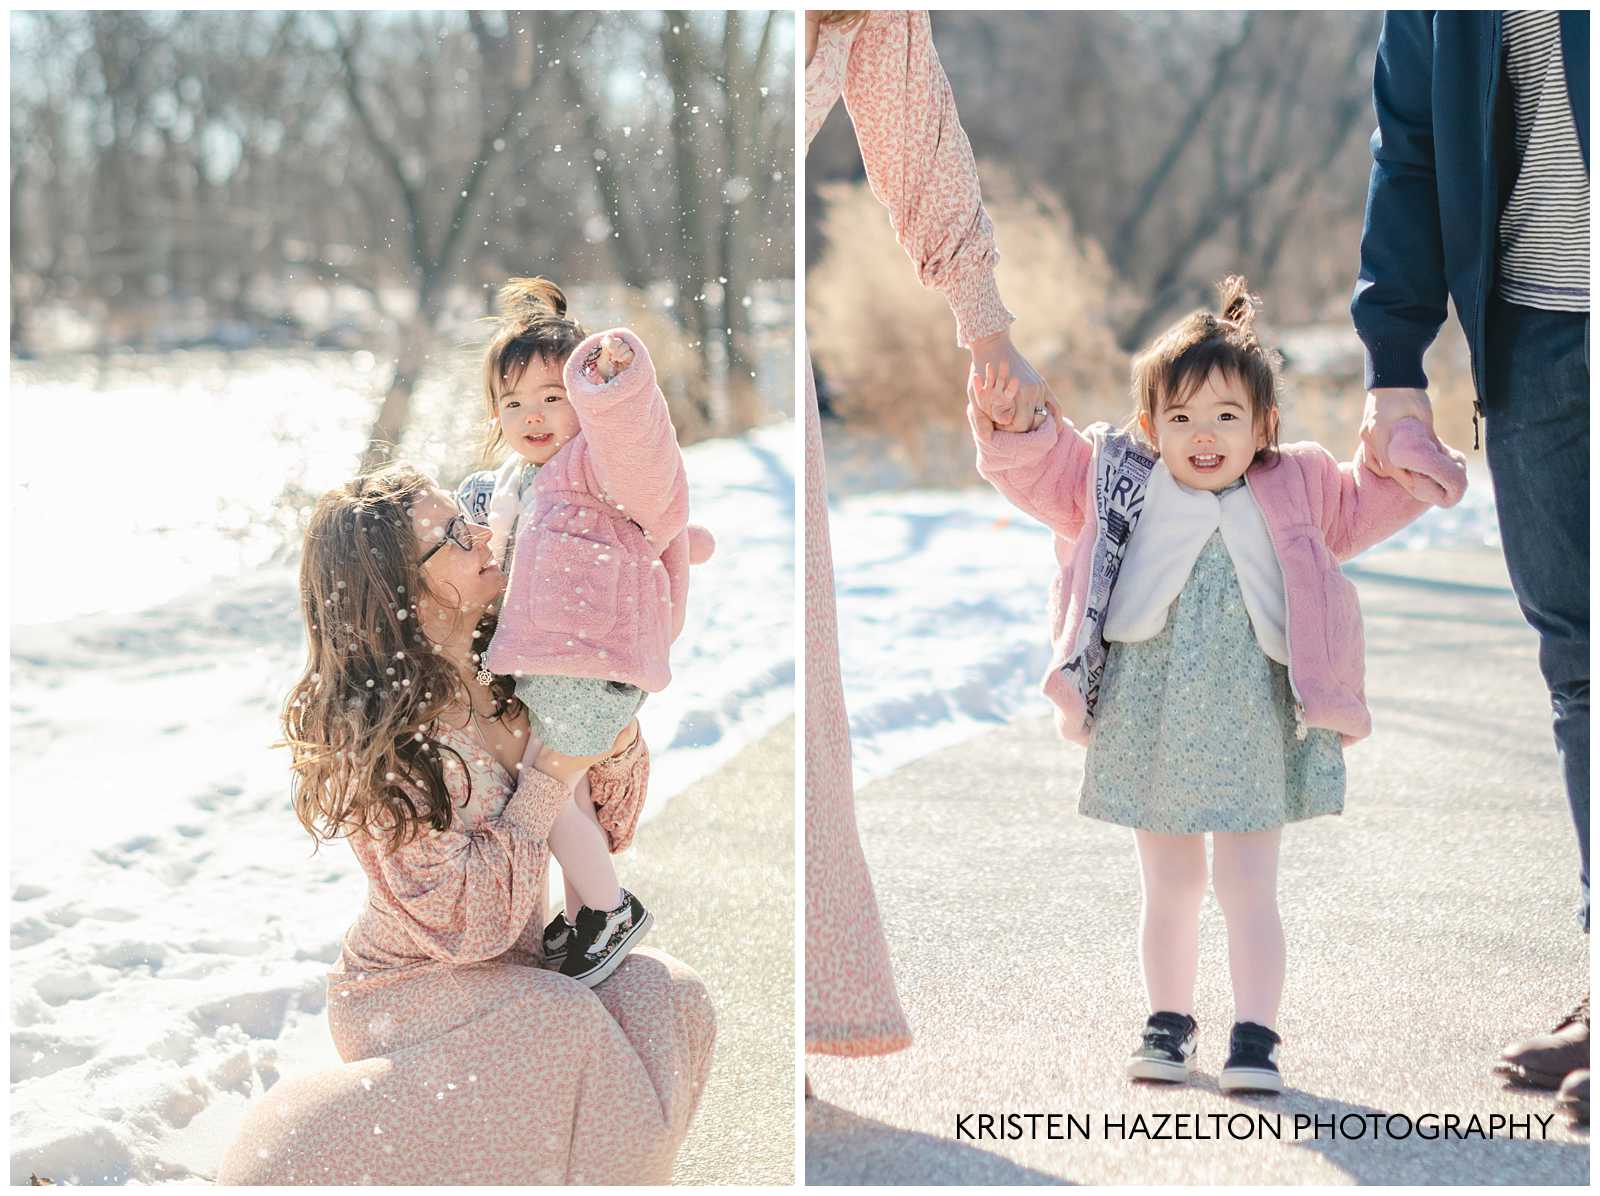 Toddler girl in pink jacket throwing snow at a Winter Family Photoshoot